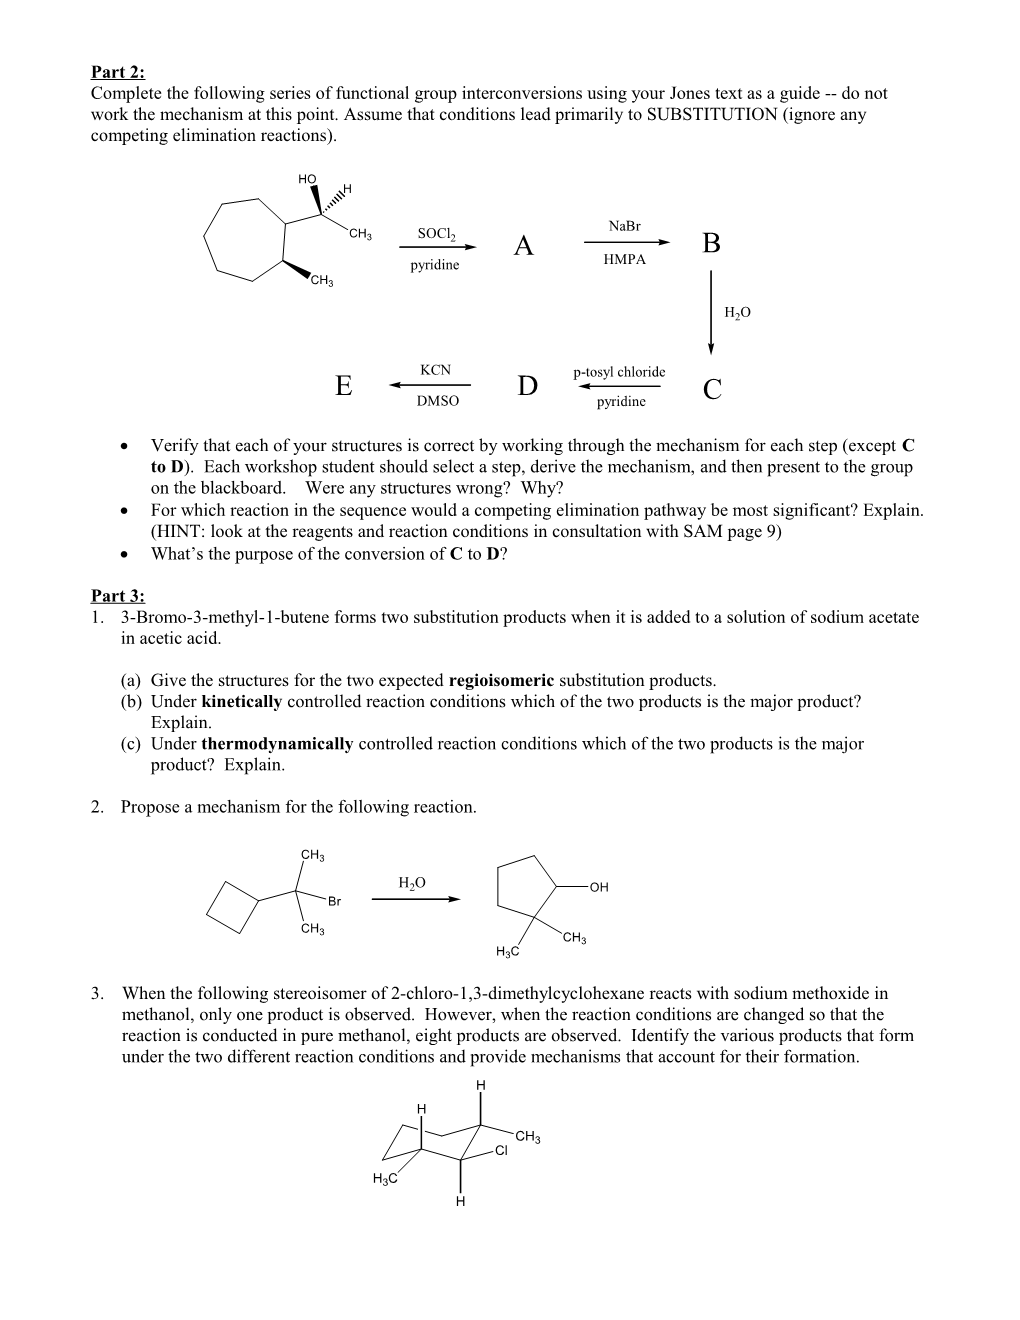 Which Reactive Species Is Present in an Methanolic Solution of Base? s1